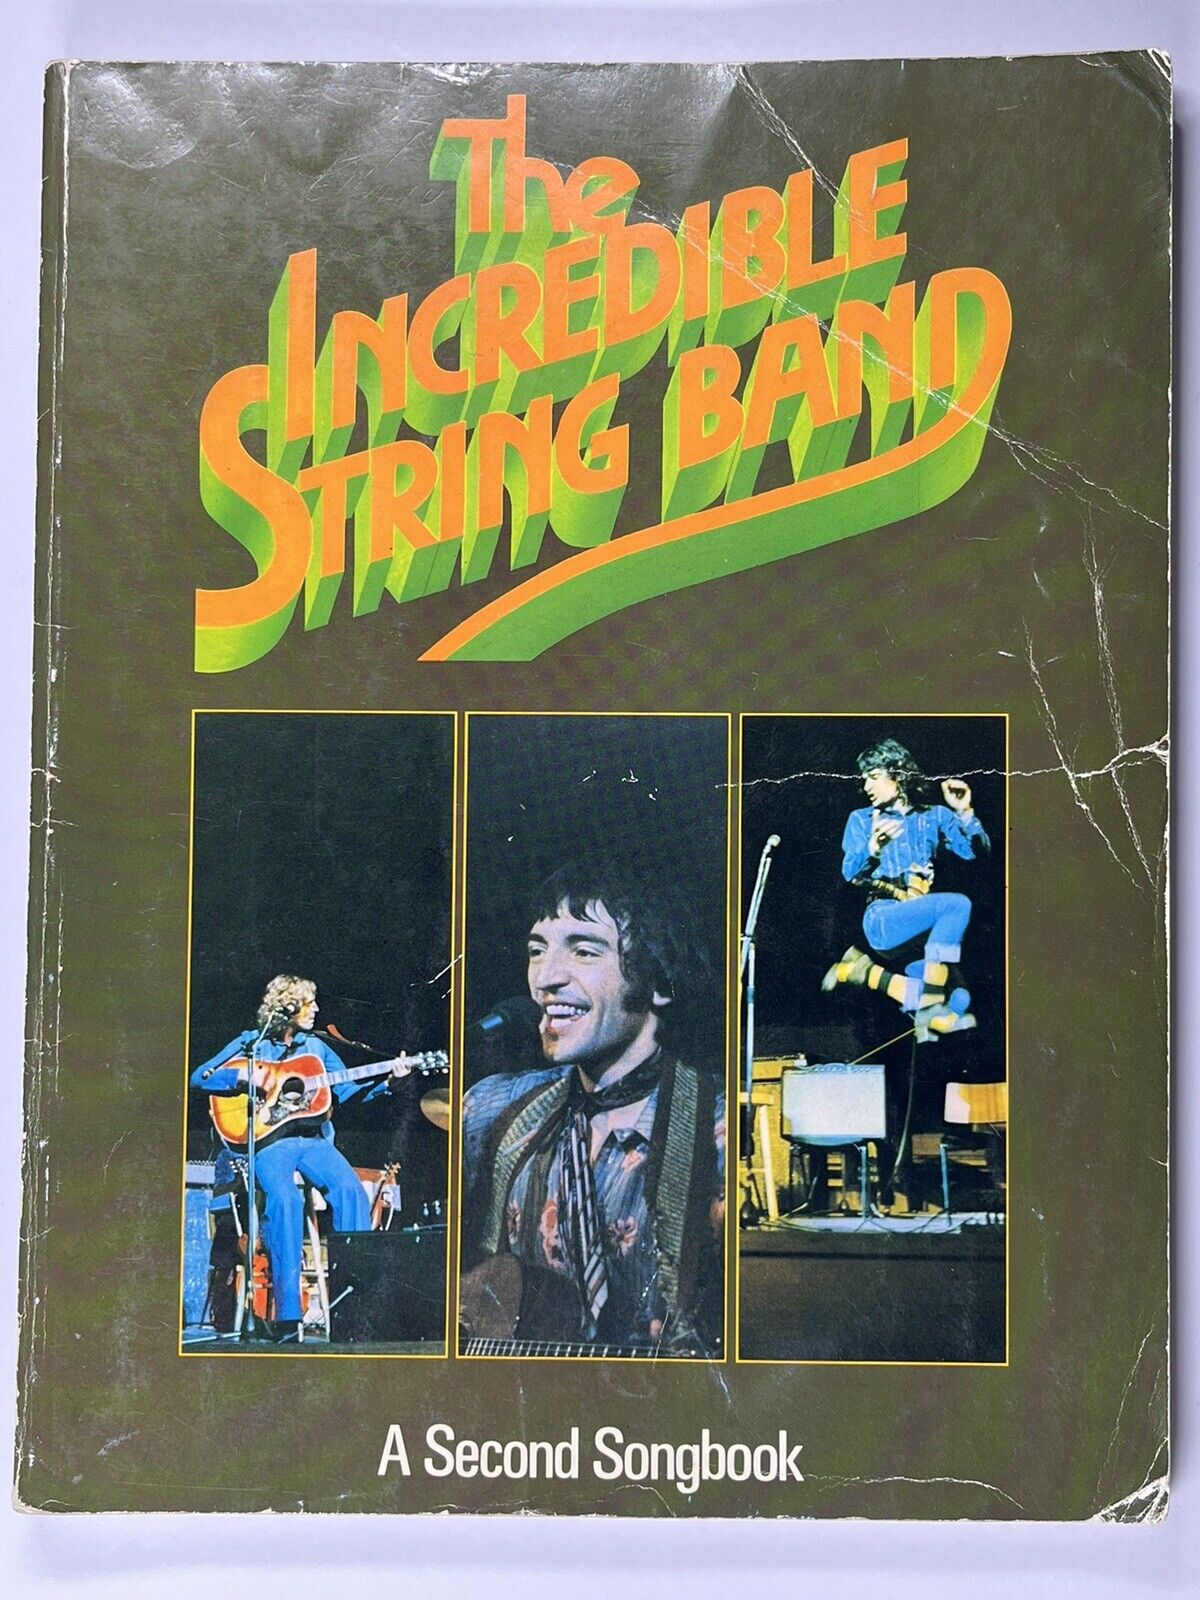 The Incredible String Band Song Book Original Vintage A Second Songbook 1973